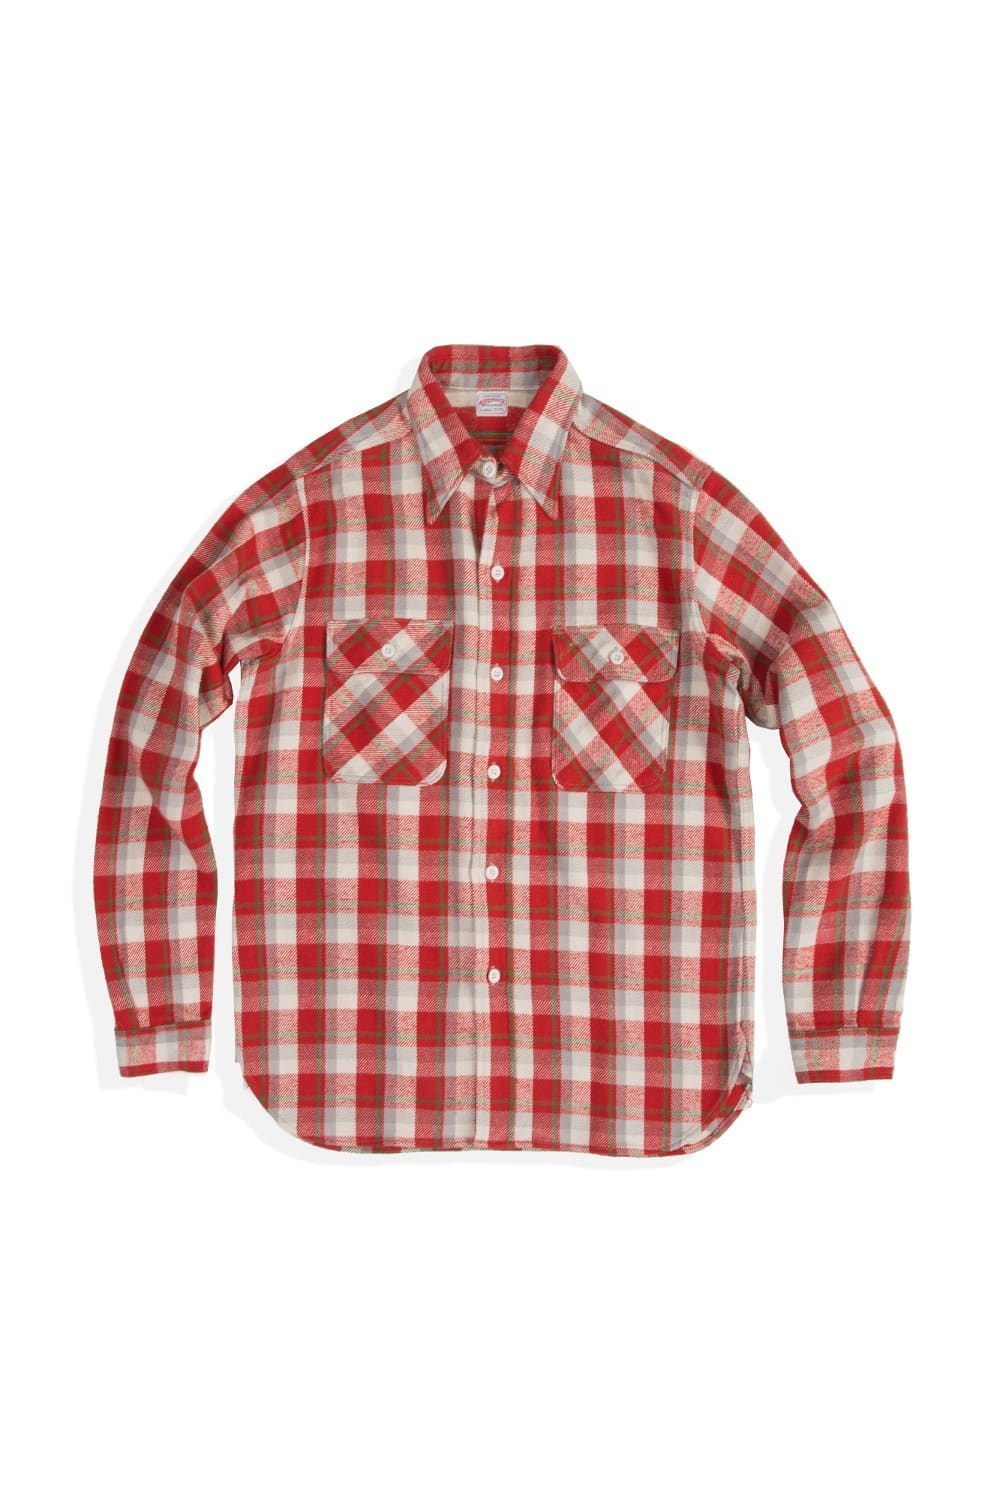 LOT 3104 FLANNEL SHIRTS PATTERN D ONE WASH RED